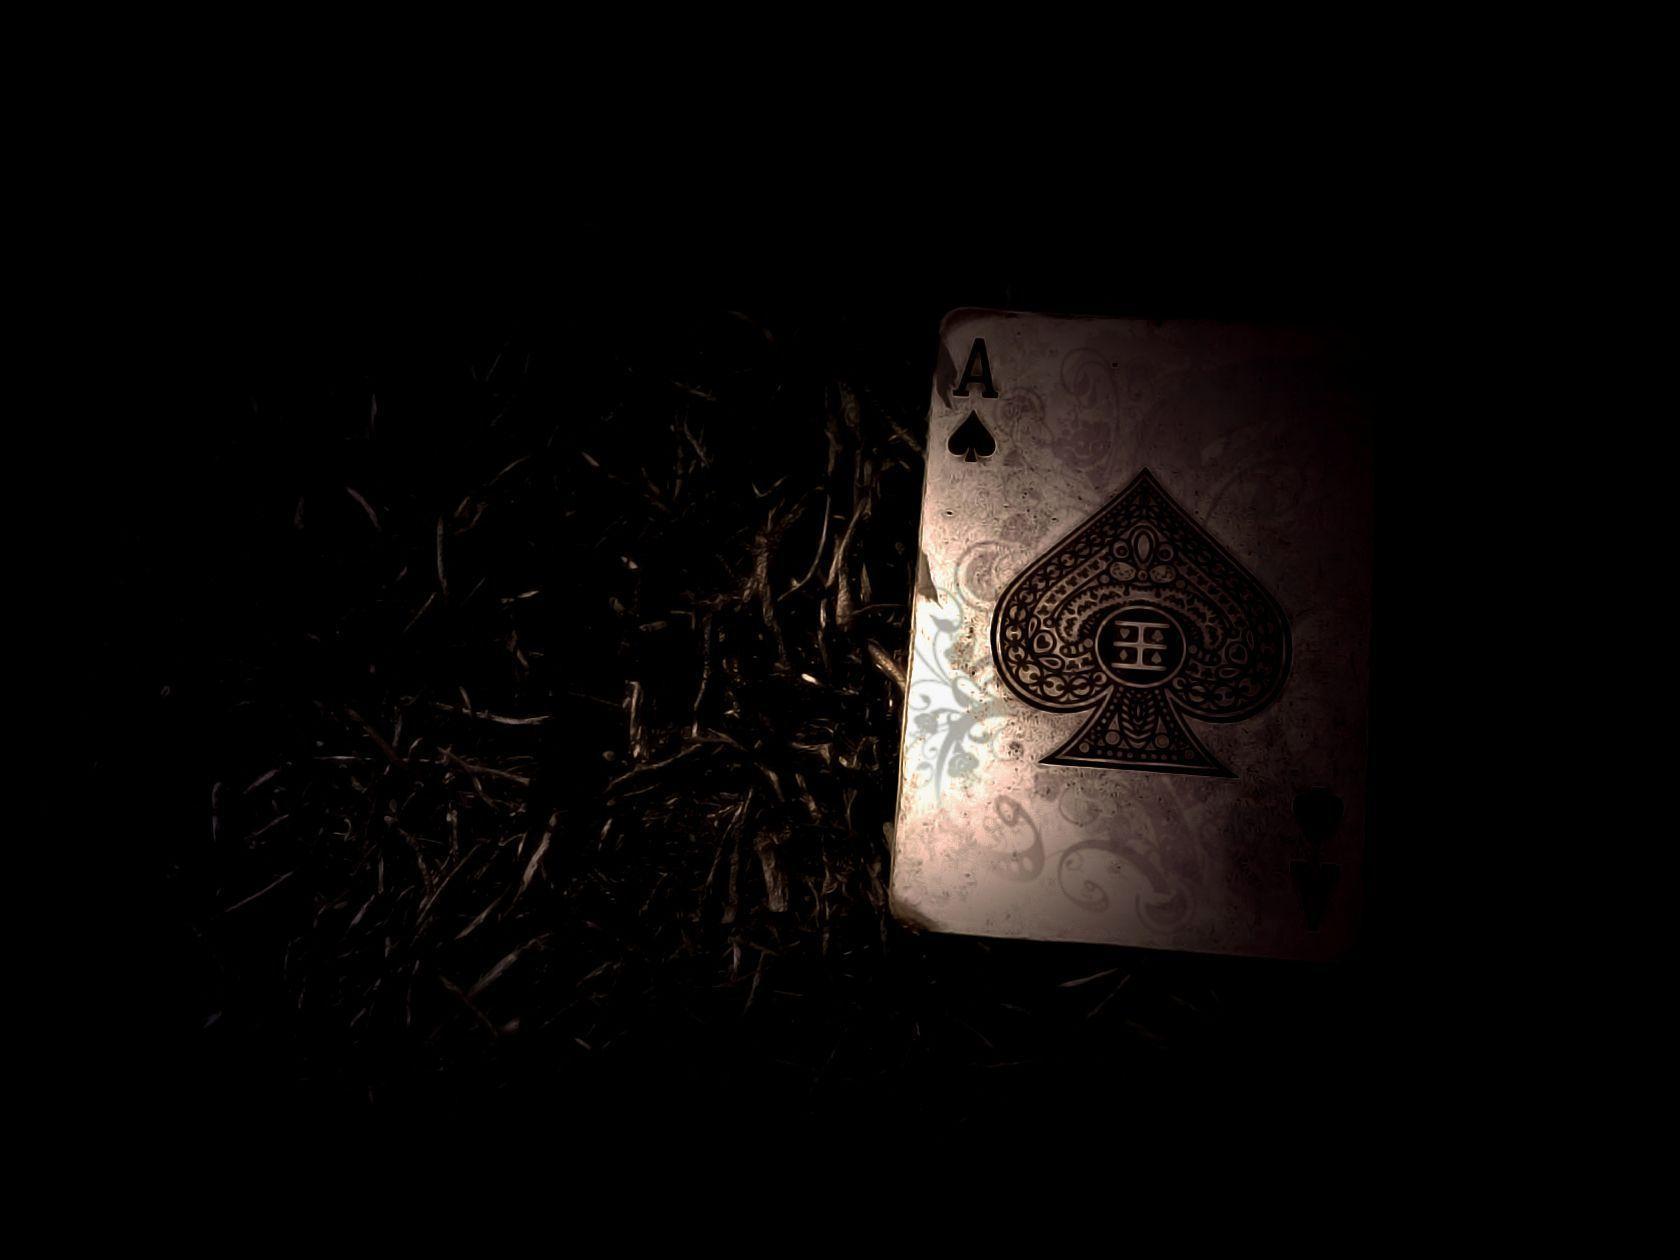 Wallpaper For > Ace Playing Card Wallpaper